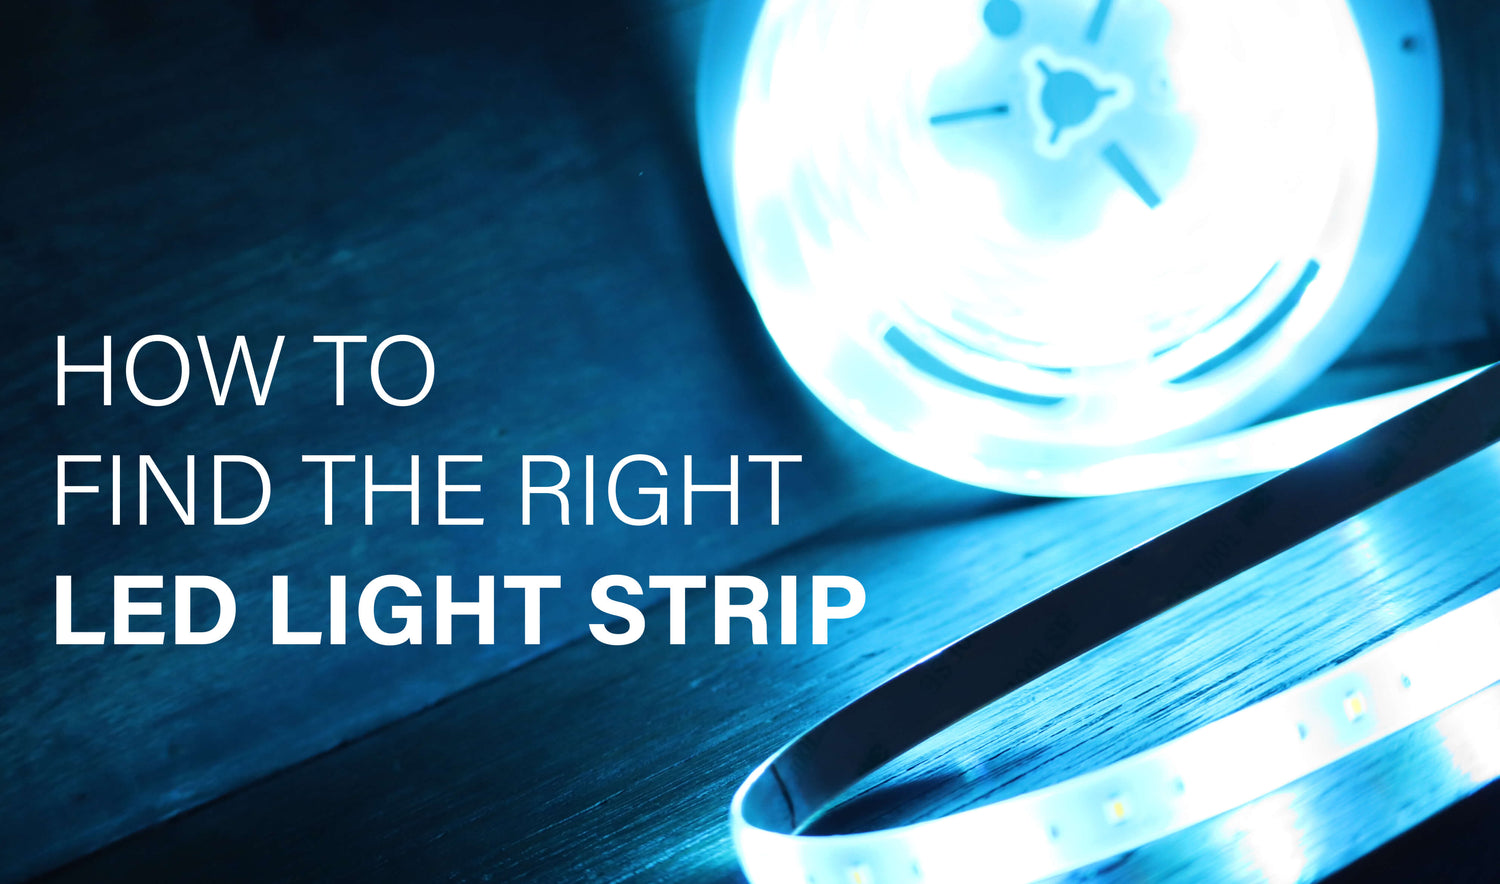 Brightness Matters: Important Information for Finding the Right Smart LED Light Strip